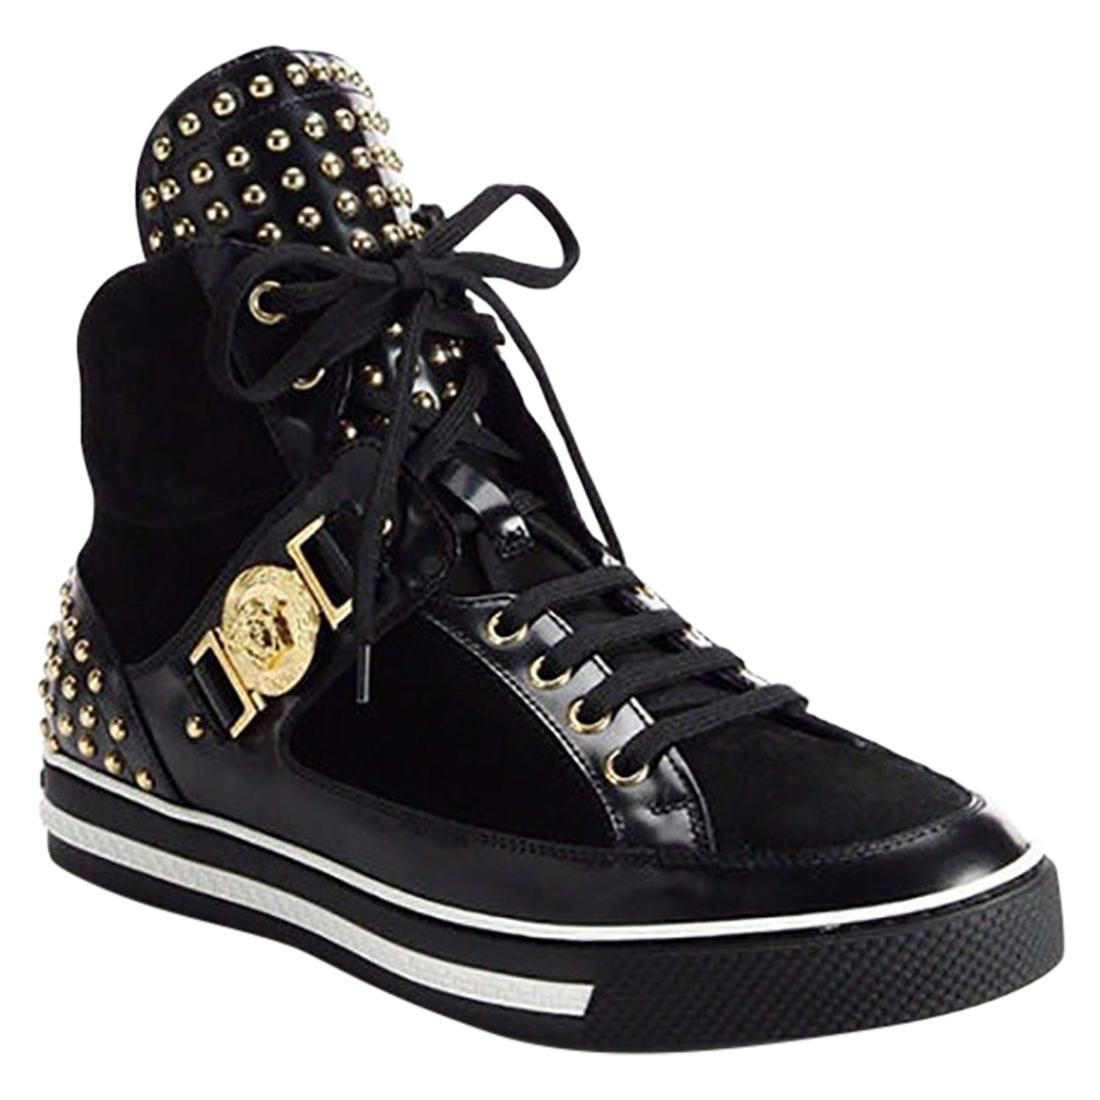 NEW VERSACE STUDDED HIGH-TOP Sneakers 42.5 - 9.5